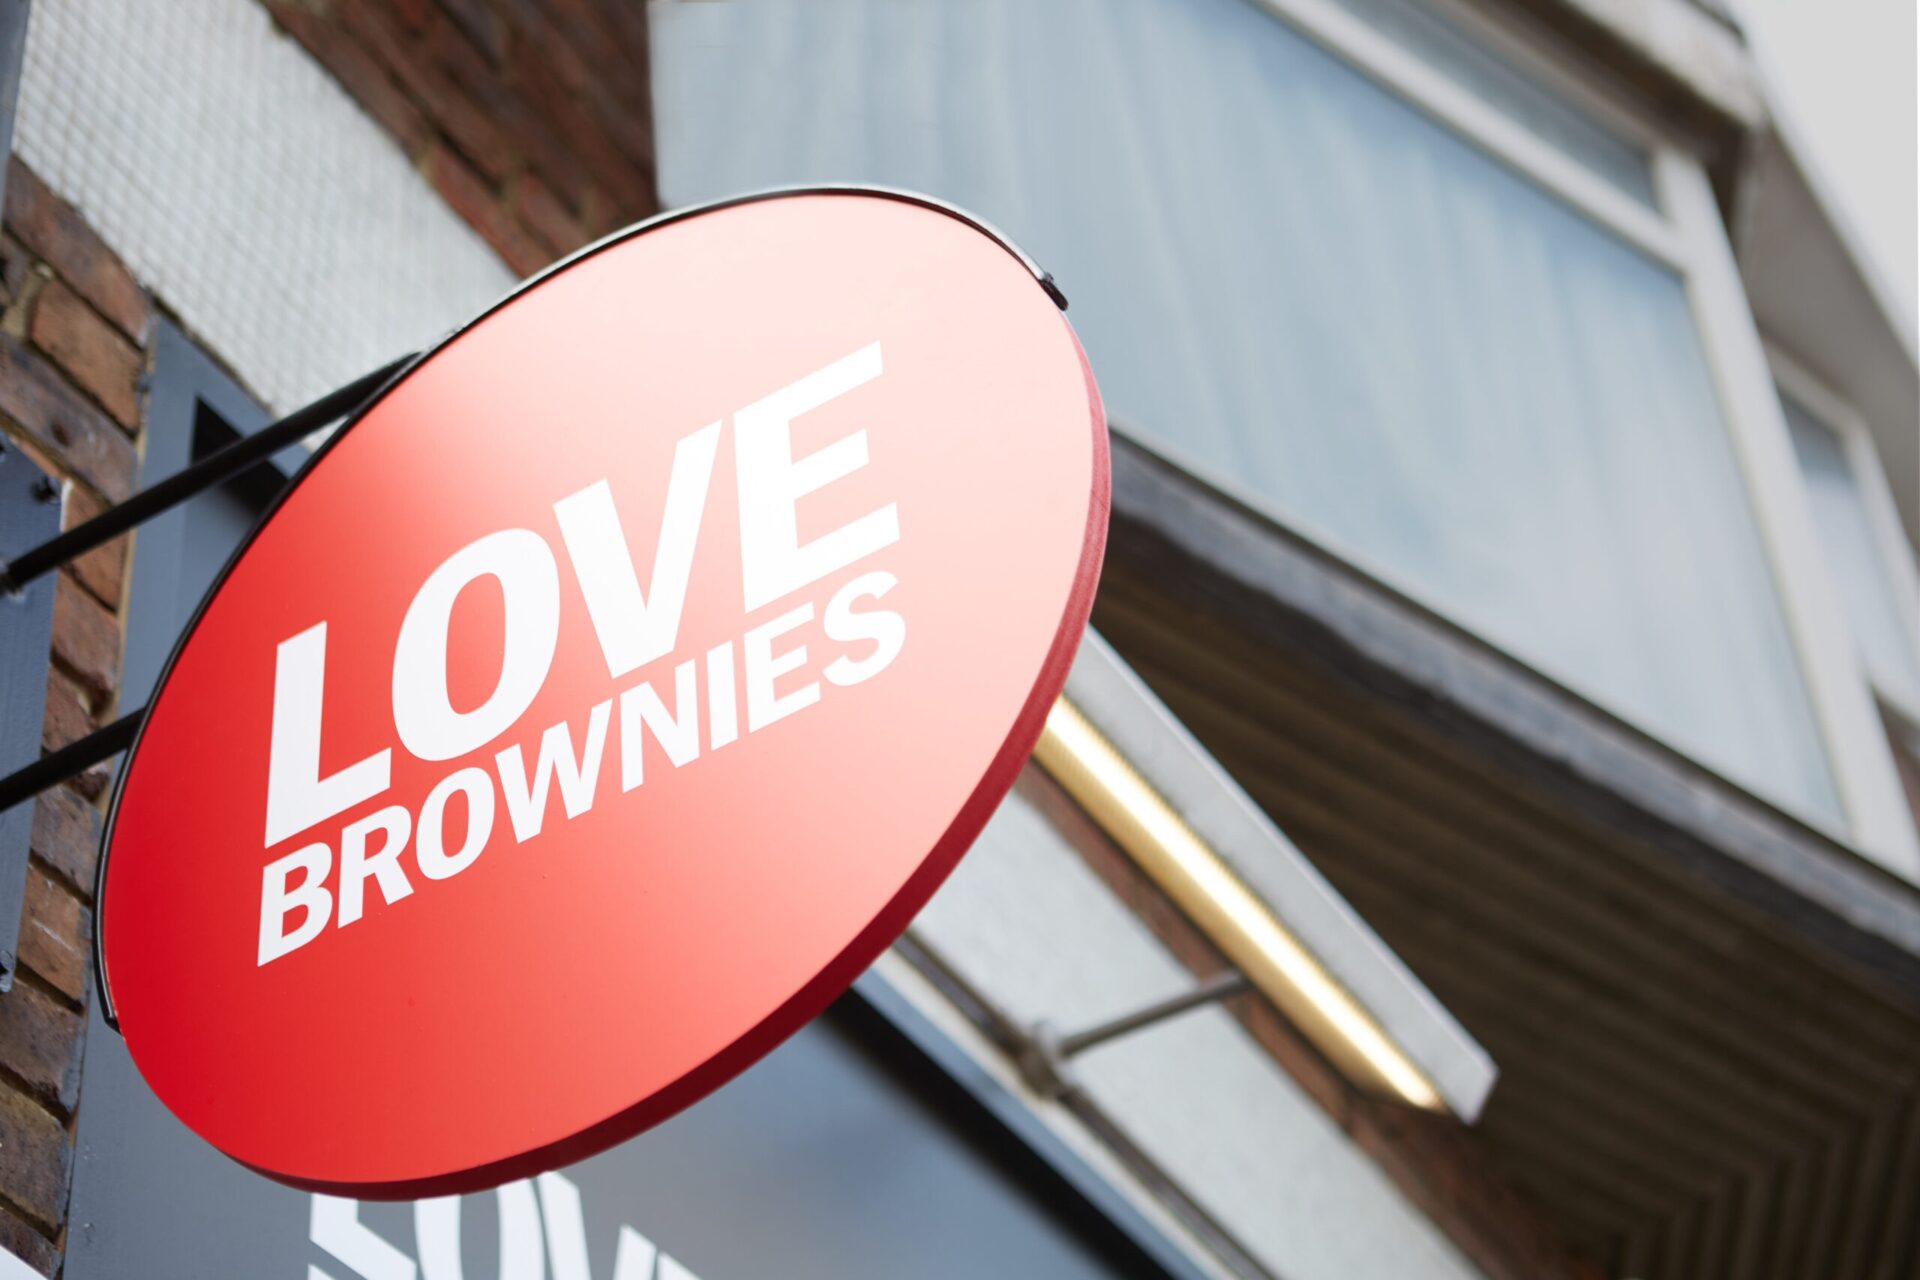 Fast-Growing Brownie Business Reveals Expansion Plans with New Stores Nationwide